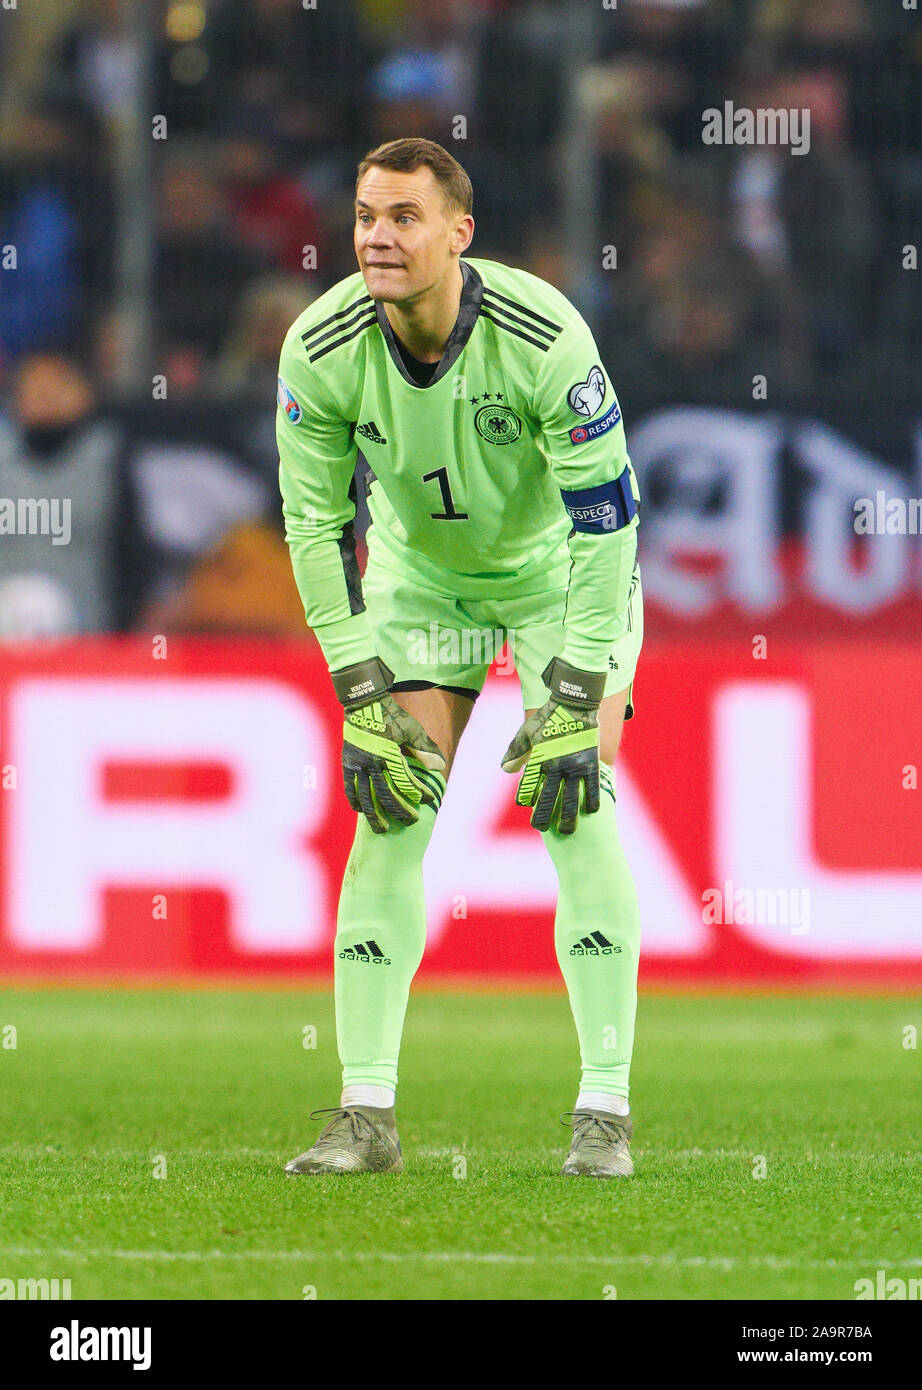 Mönchengladbach, Germany. 16th Nov 2019. EURO QUALI 2020, Germany-Belarus, Mönchengladbach Nov 16, 2019. Manuel NEUER, DFB 1 goalkeeper, whole figure, action, single image, single action, GERMANY - BELARUS 4-0 Important: DFB regulations prohibit any use of photographs as image sequences and/or quasi-video. Qualification for European Championships, EM Quali, 2020 Season 2019/2020, November 16, 2019 in Mönchengladbach, Germany. Credit: Peter Schatz/Alamy Live News Stock Photo